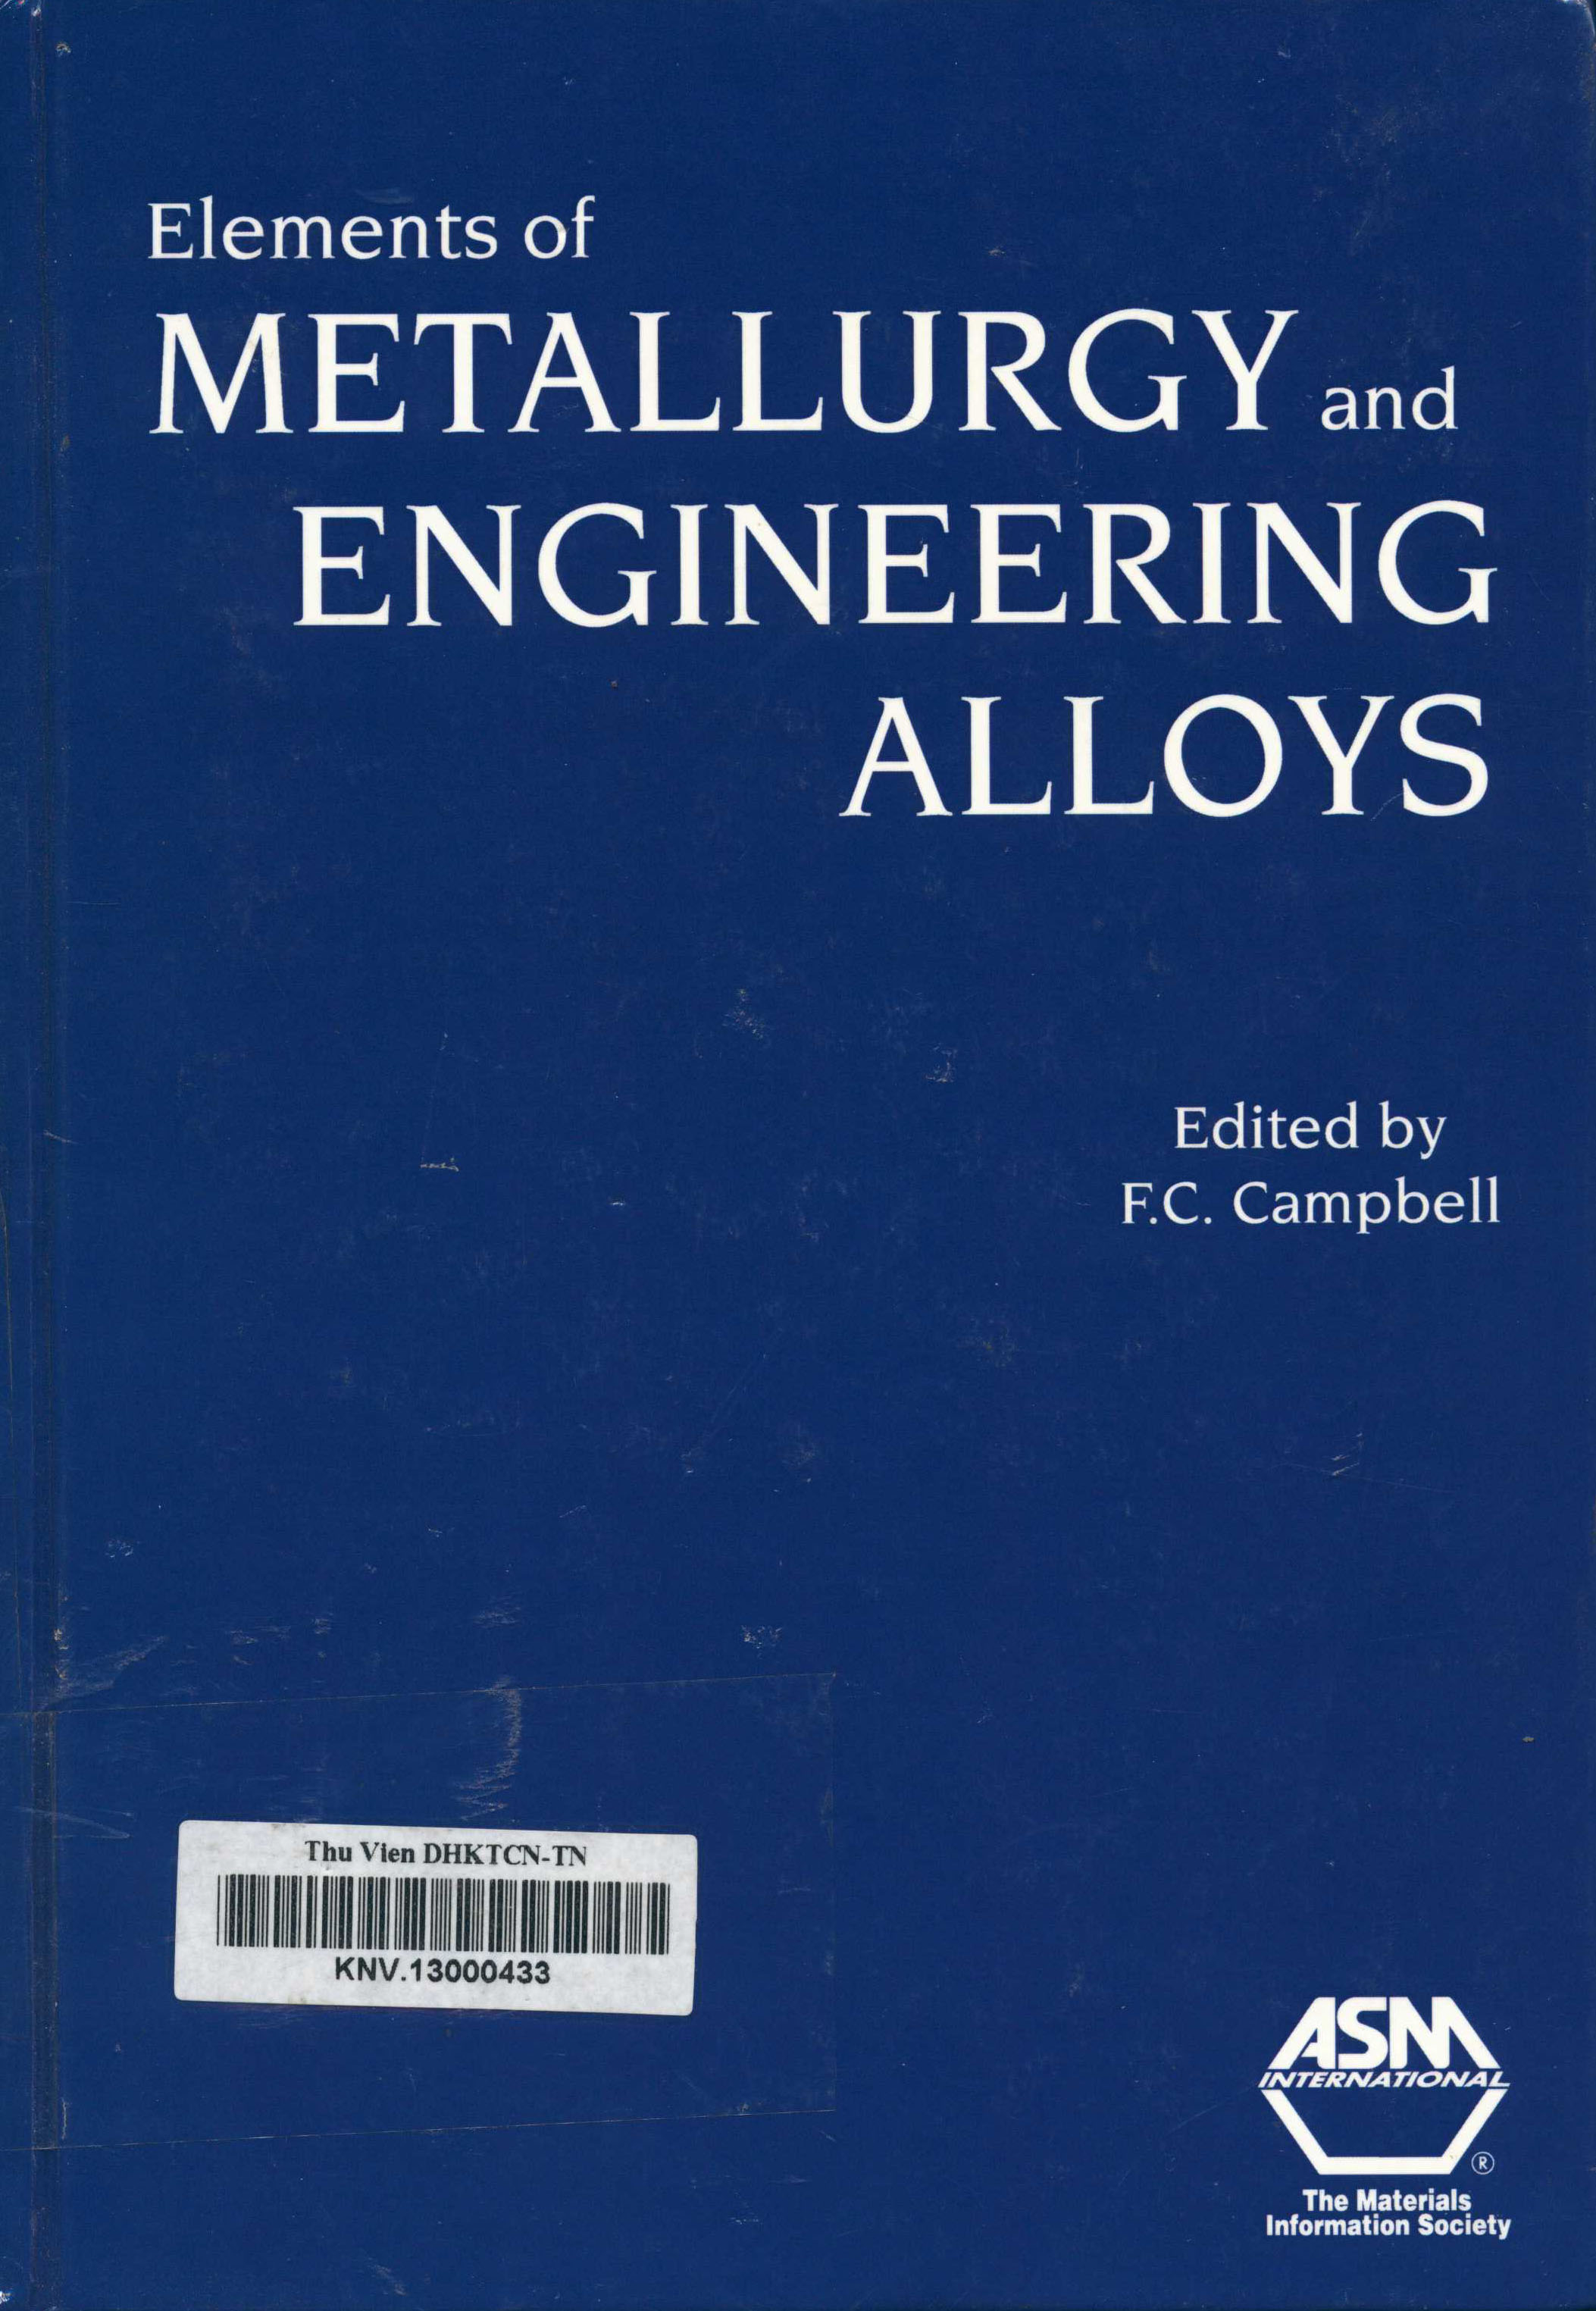 Elements of metallurgy and engineering alloys